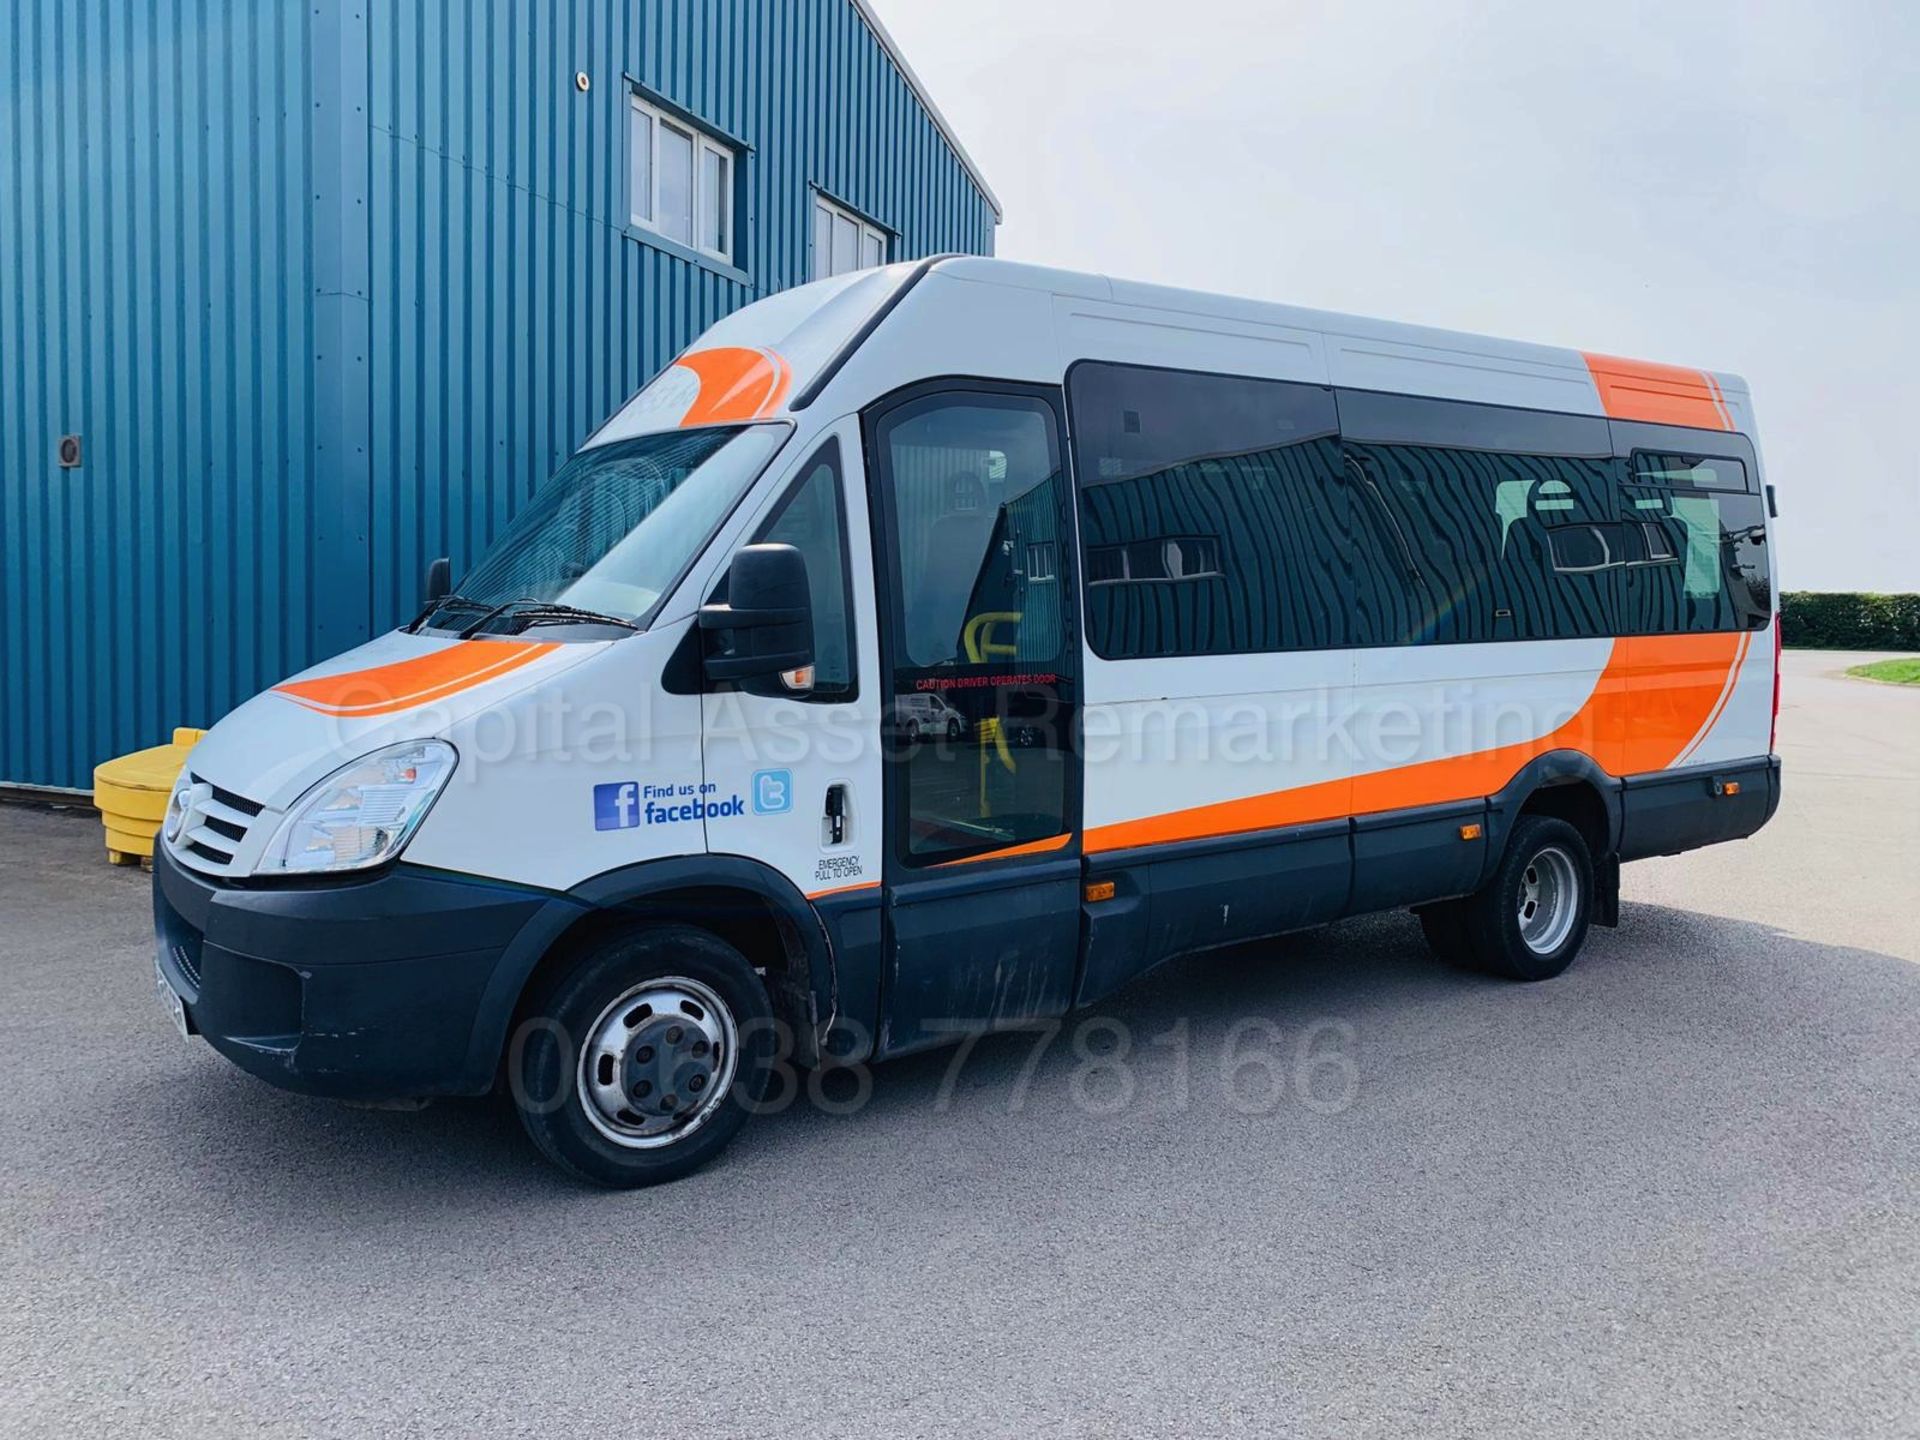 (On Sale) IVECO DAILY *16 SEATER MINI-BUS / COACH* (2010) '3.0 DIESEL - 146 BHP' *ELEC CHAIR RAMP*